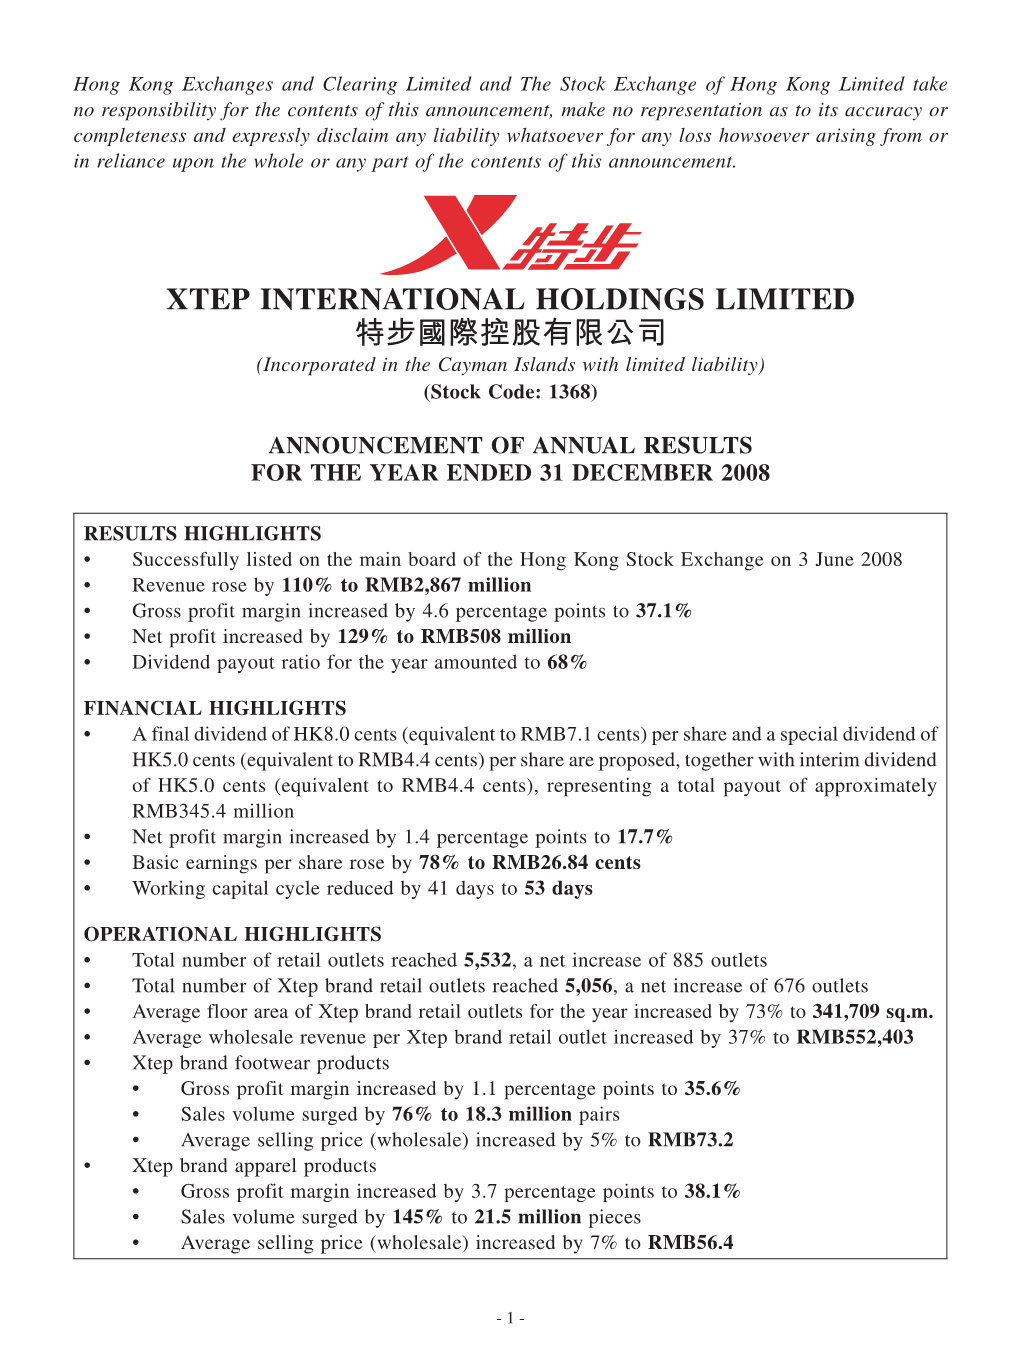 XTEP INTERNATIONAL HOLDINGS LIMITED 特步國際控股有限公司 (Incorporated in the Cayman Islands with Limited Liability) (Stock Code: 1368)